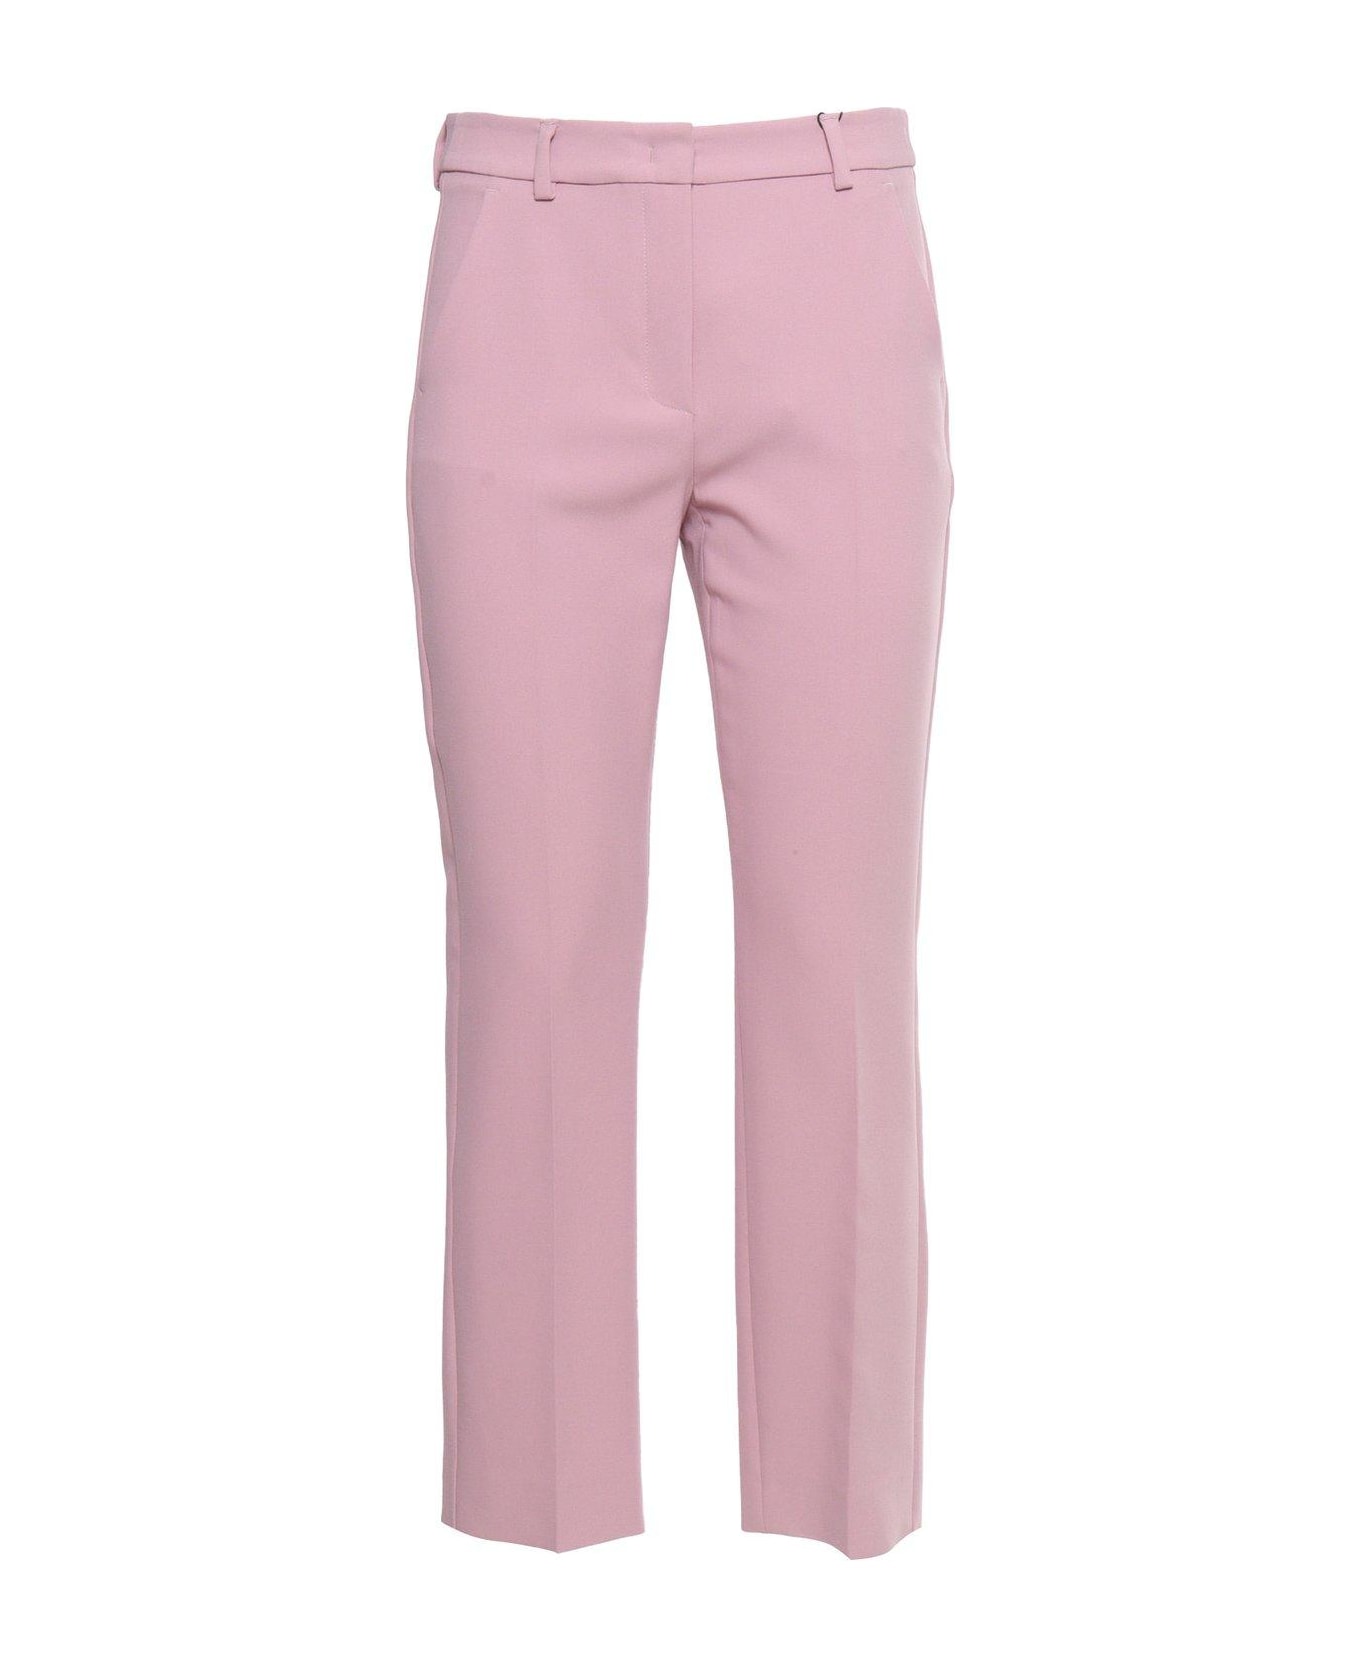 Weekend Max Mara Straight Fit Cropped Trousers - PINK